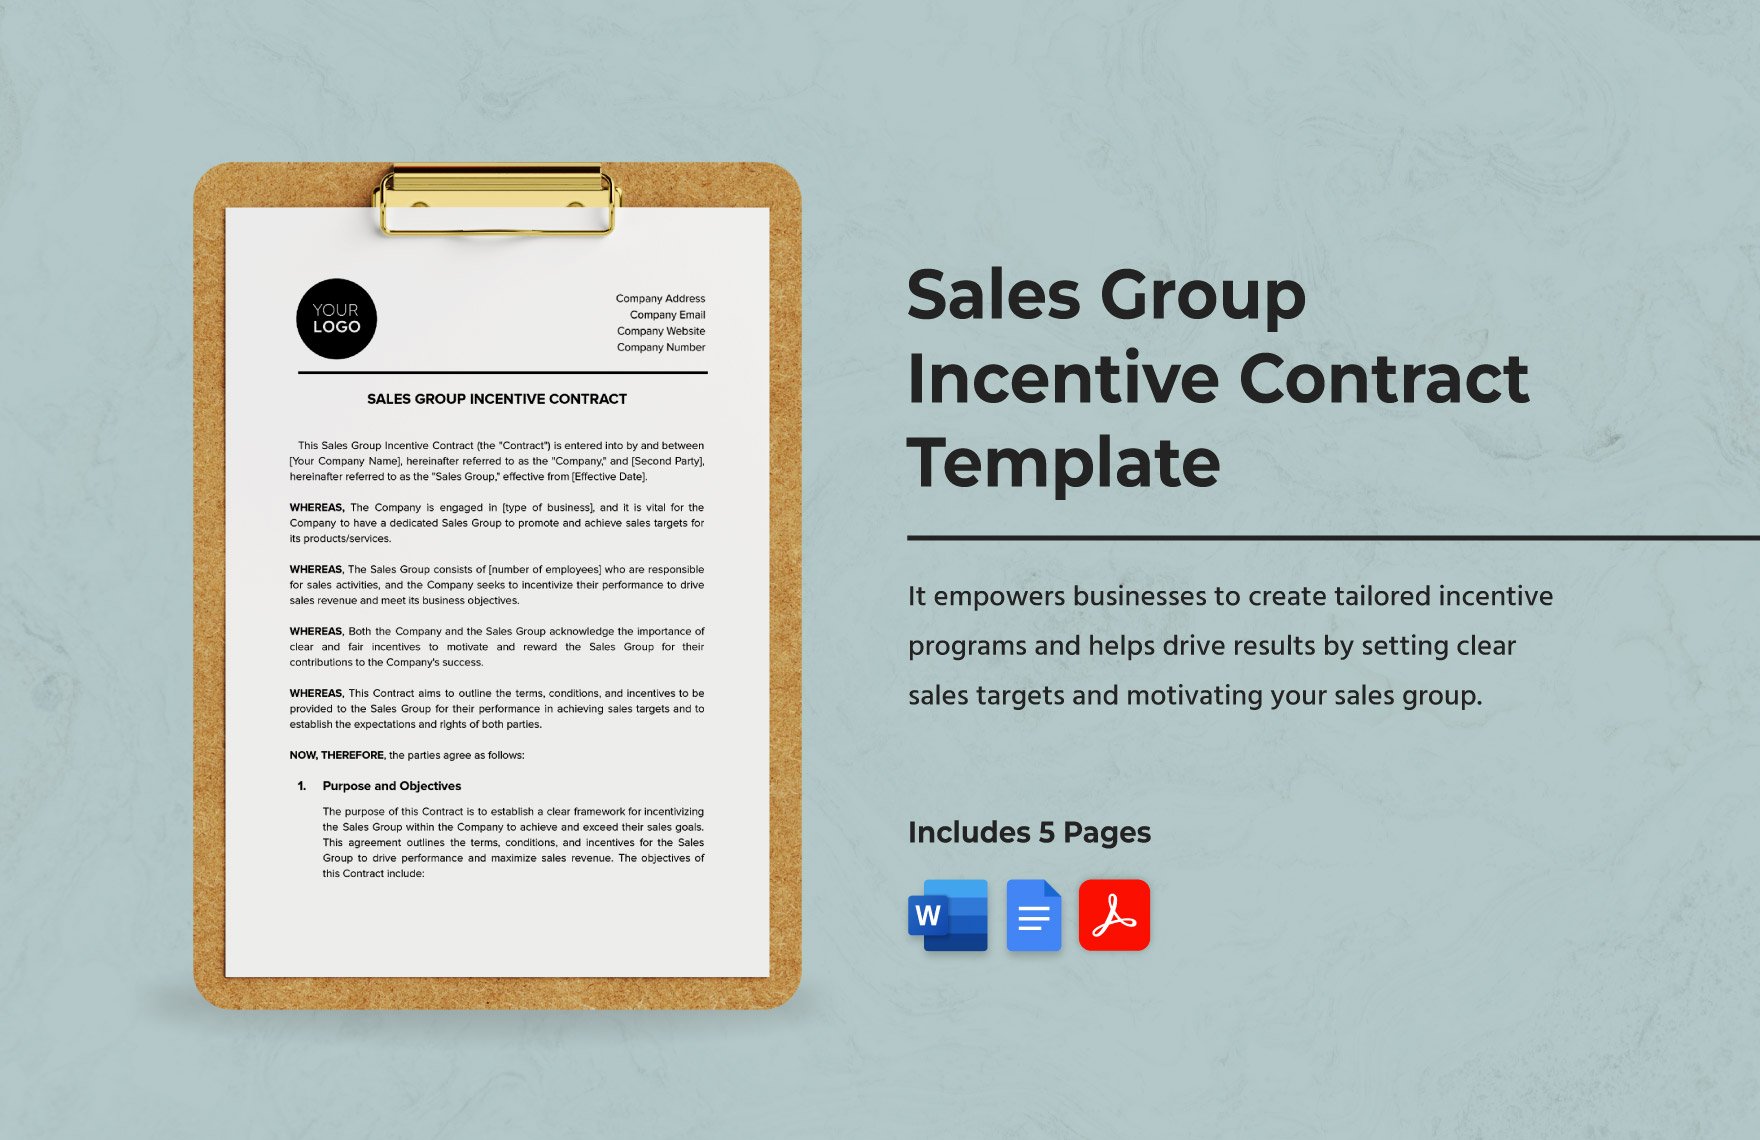 Sales Group Incentive Contract Template in Word, Google Docs, PDF